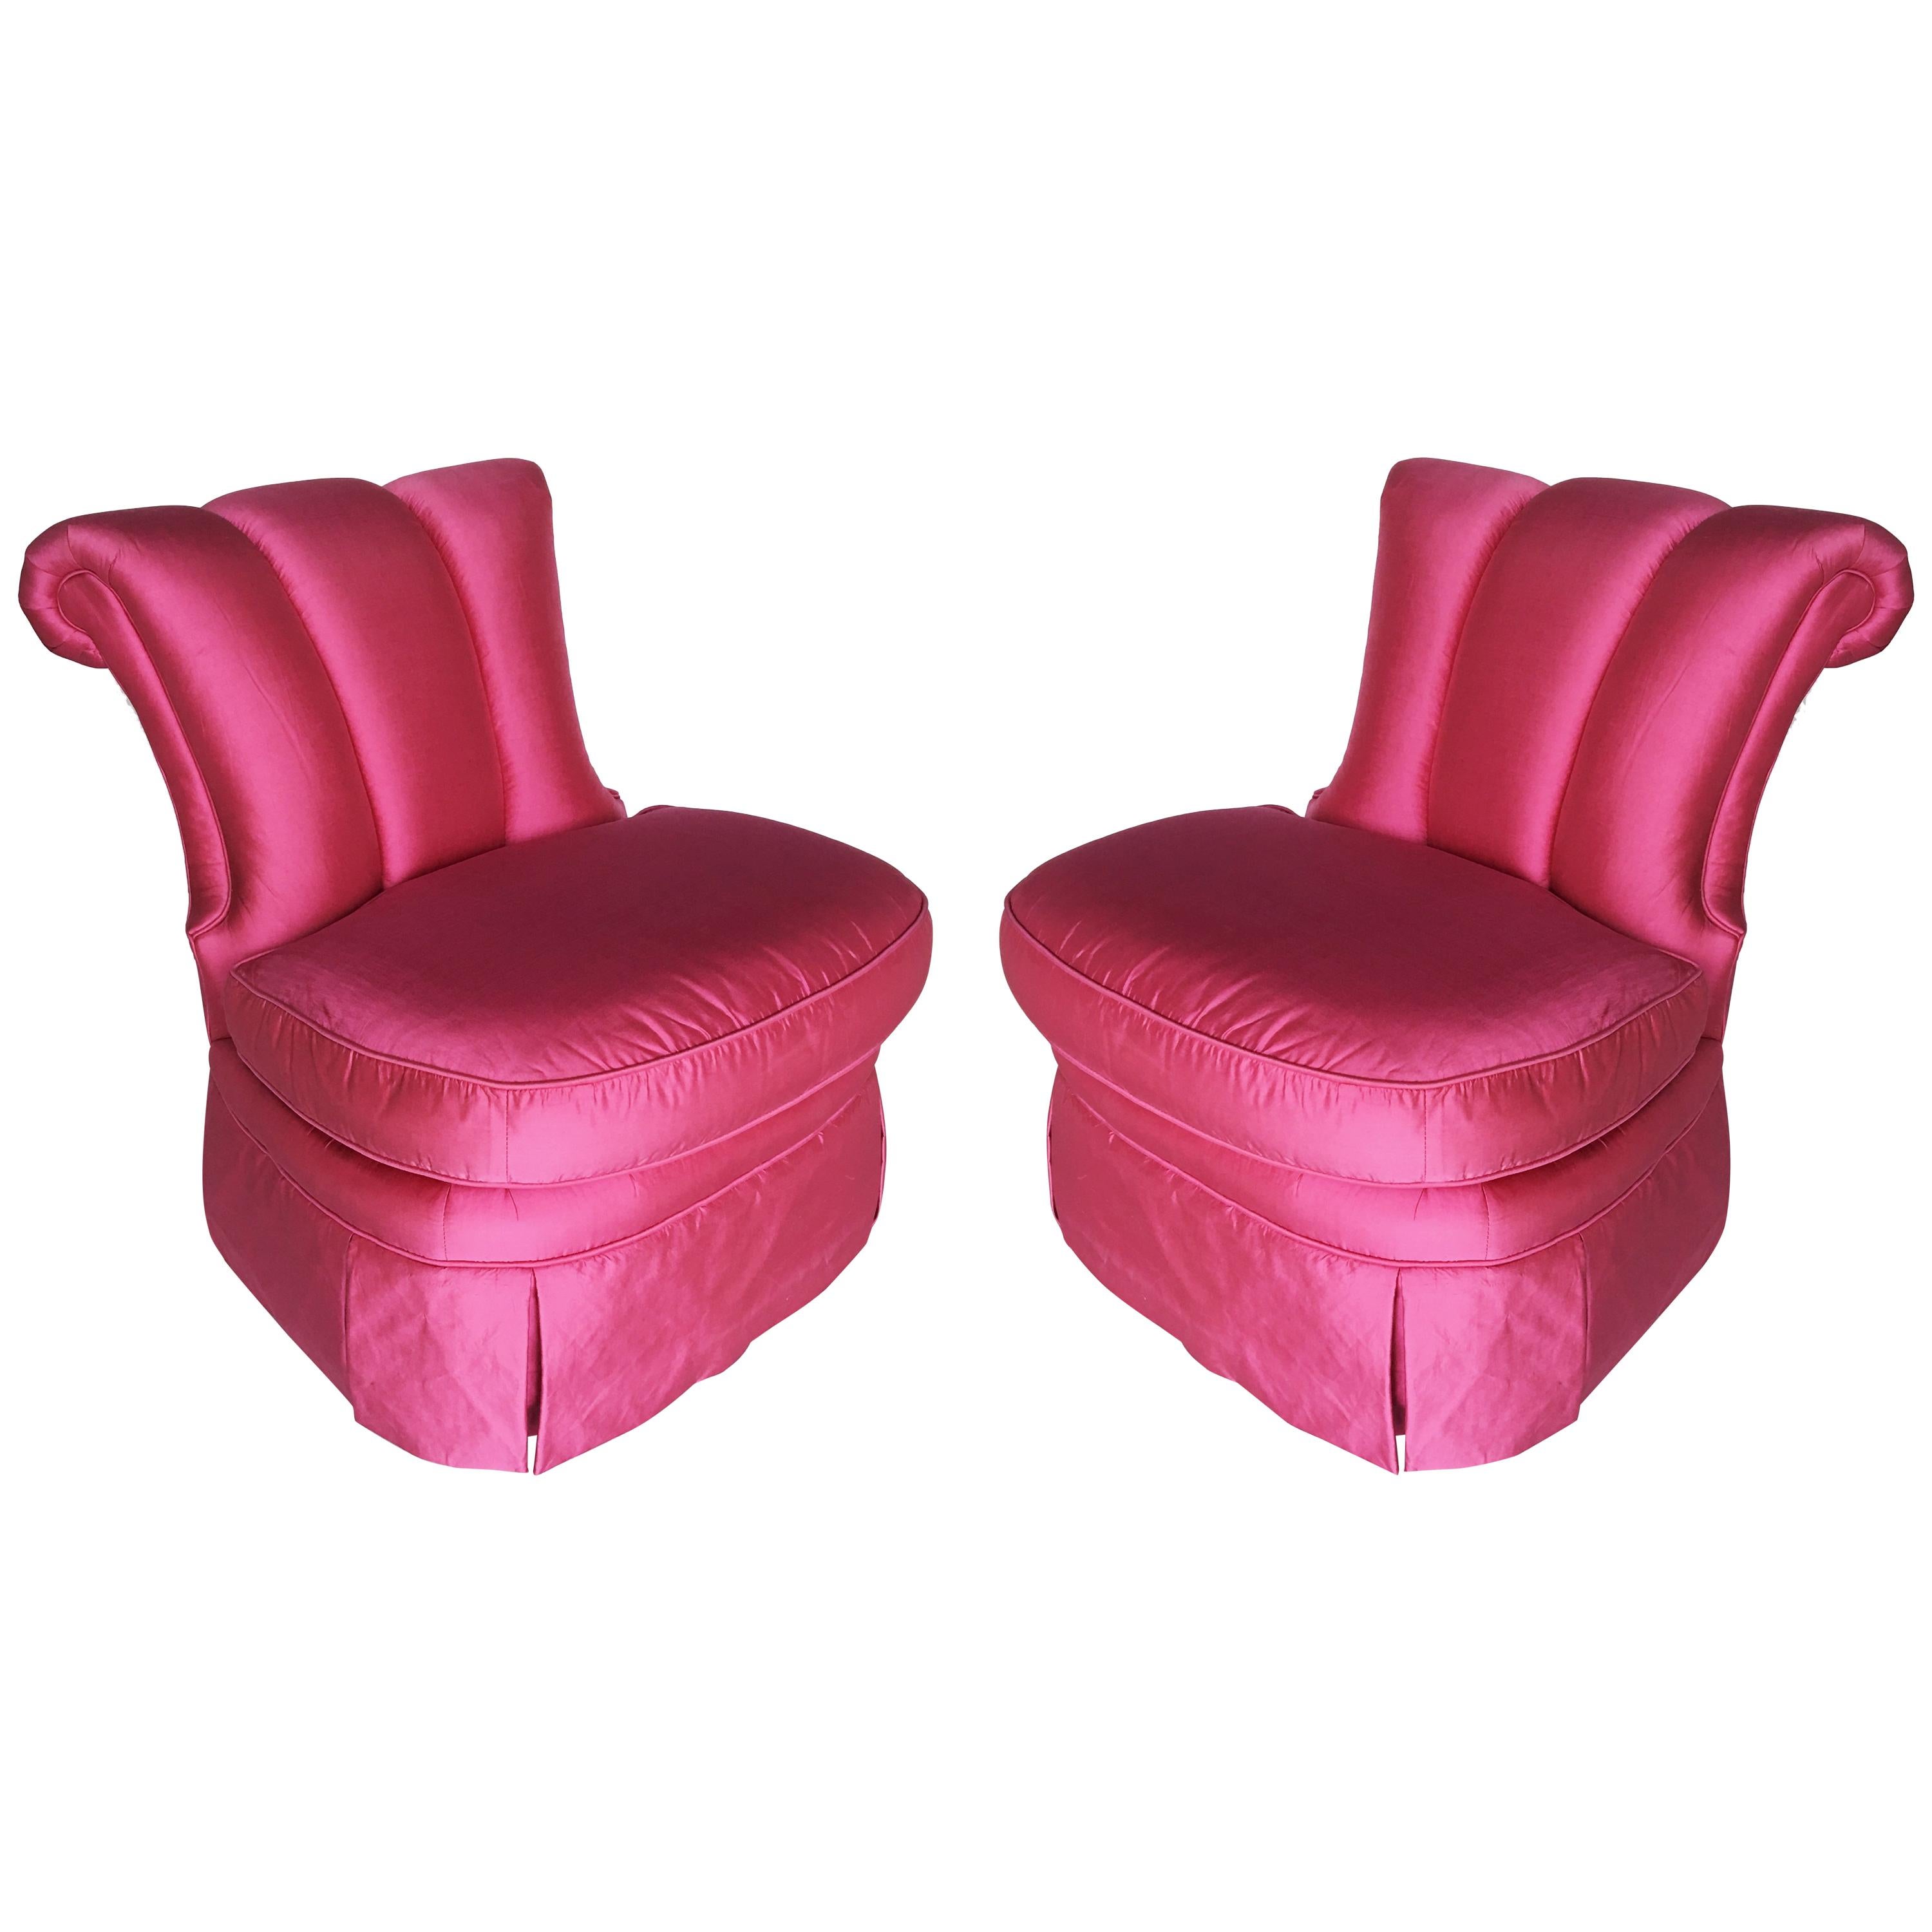 Elegant Pair of Slipper Chairs in Pink Silk For Sale